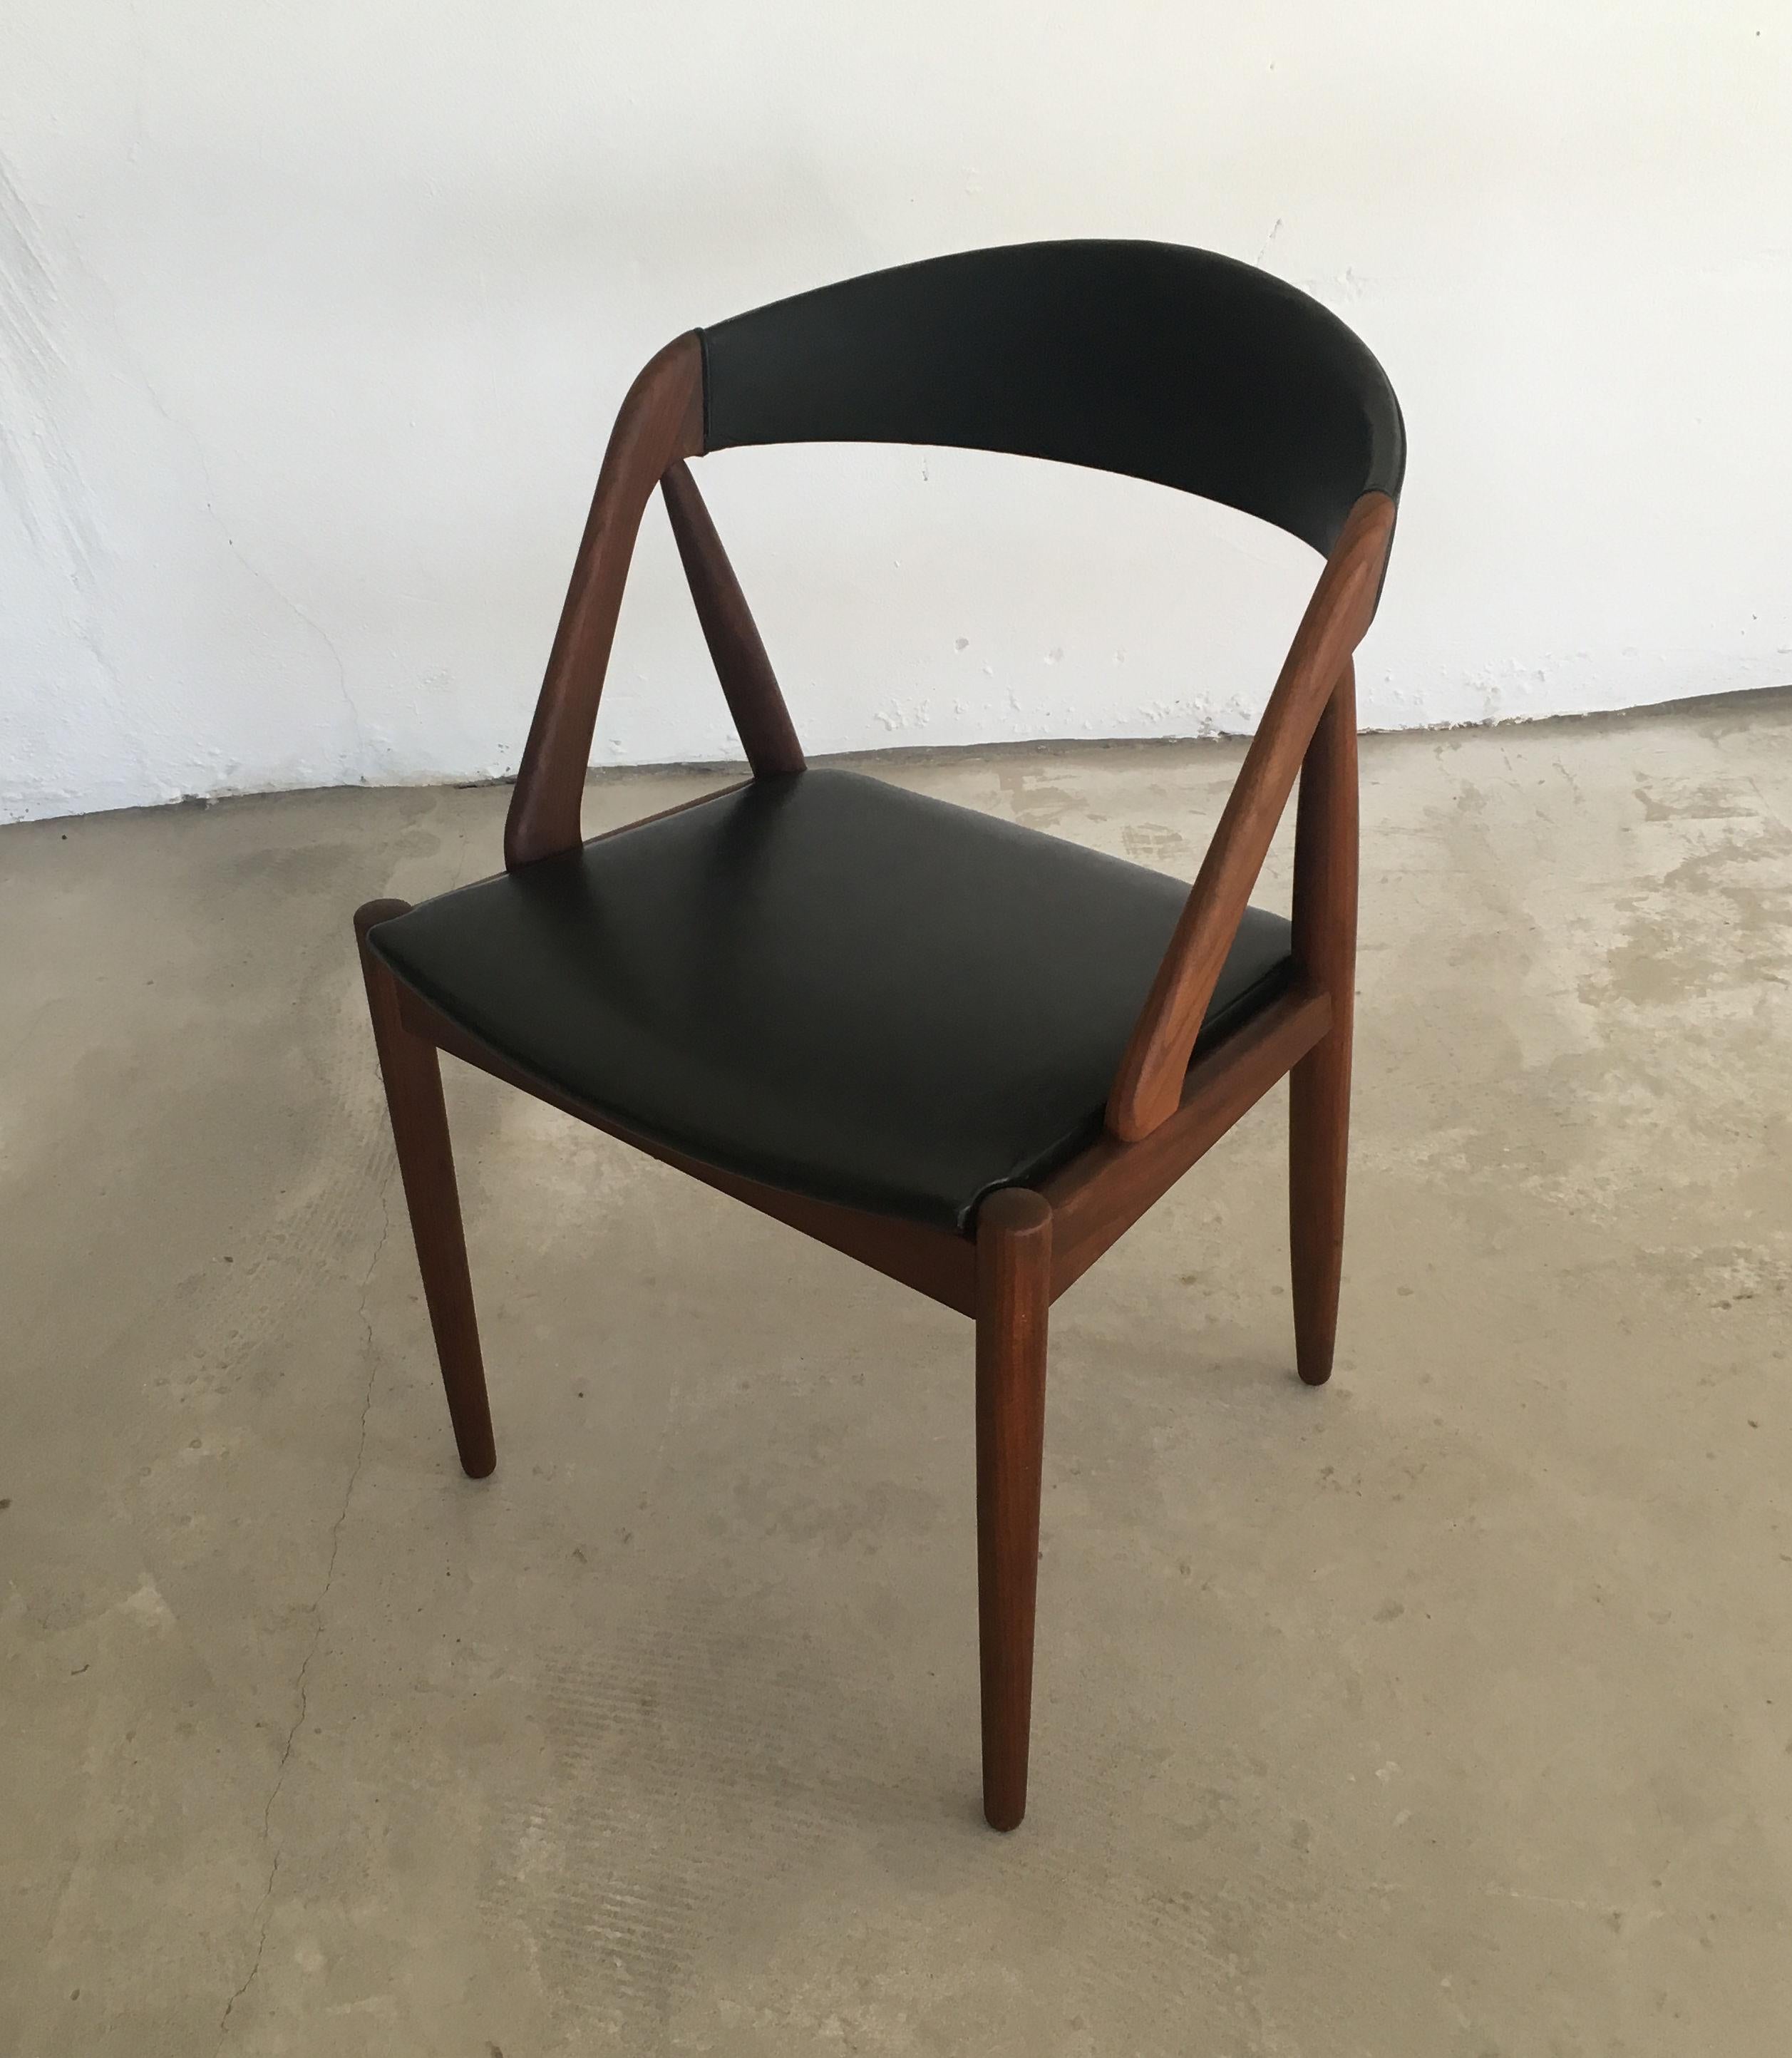 Scandinavian Modern 1960s Kai Kristiansen Fully Restored Dining Chairs in Teak and Black Leather For Sale